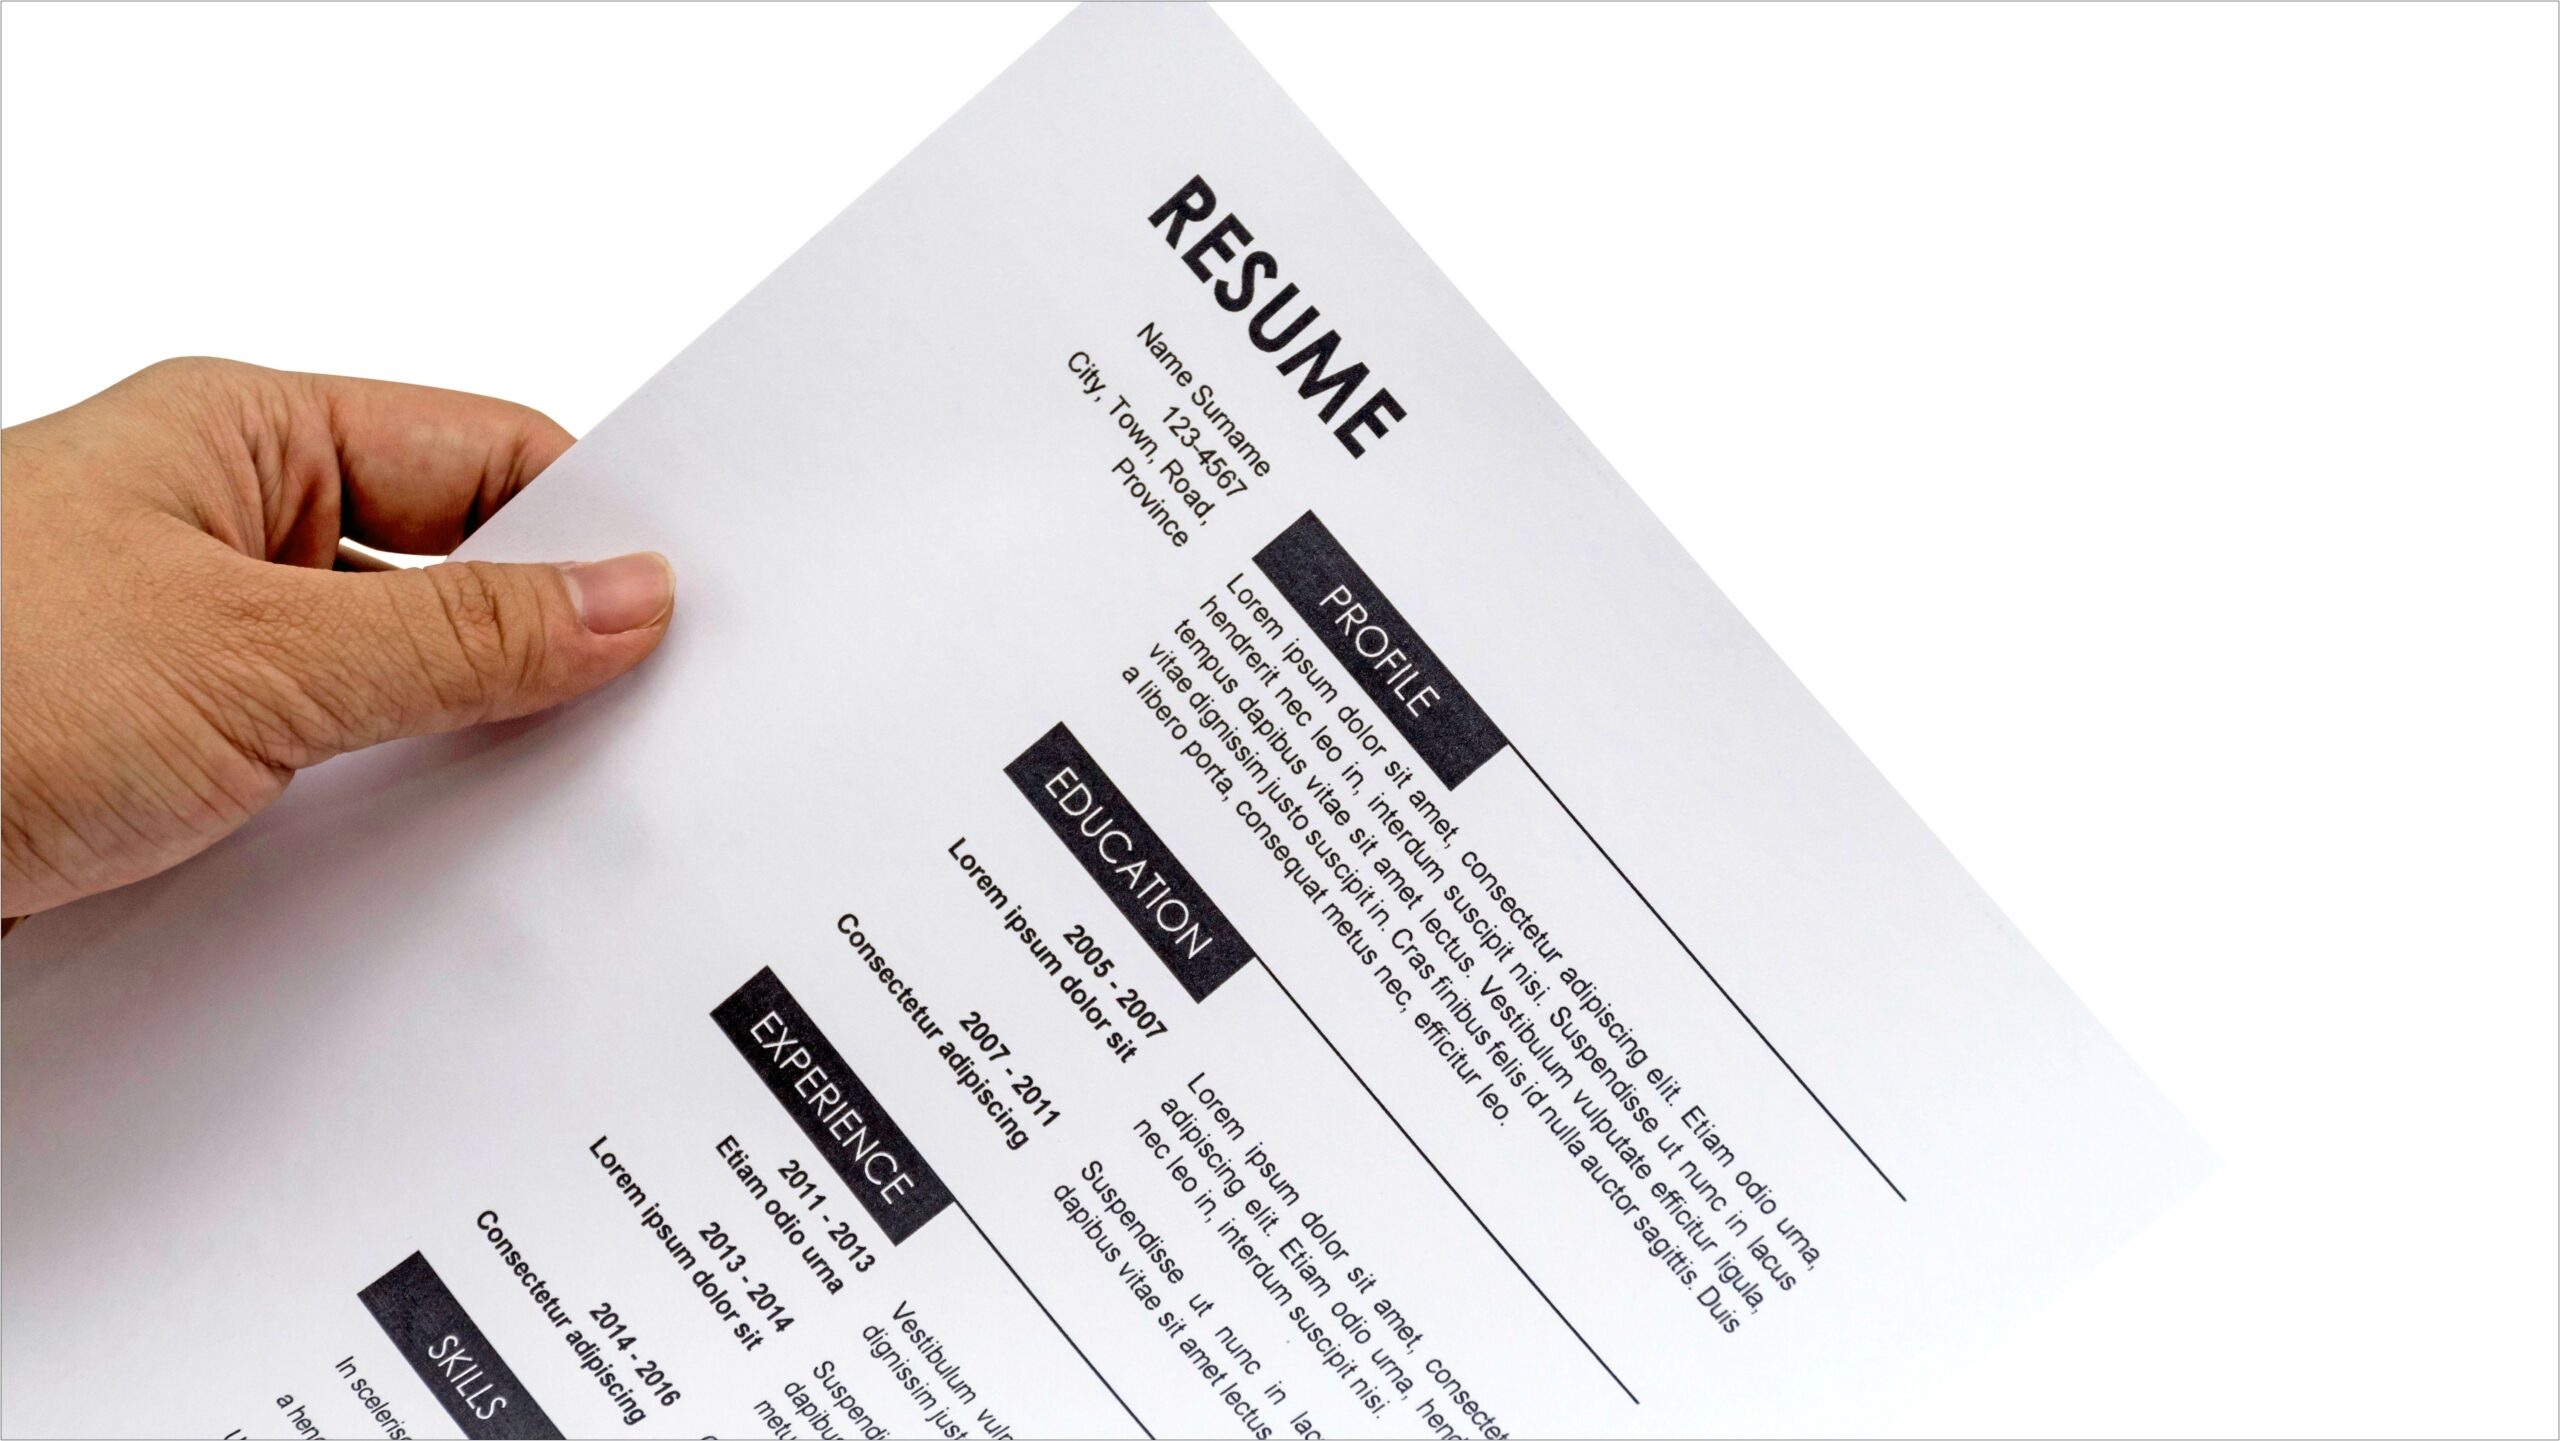 Example Of A Simple Resume Letter